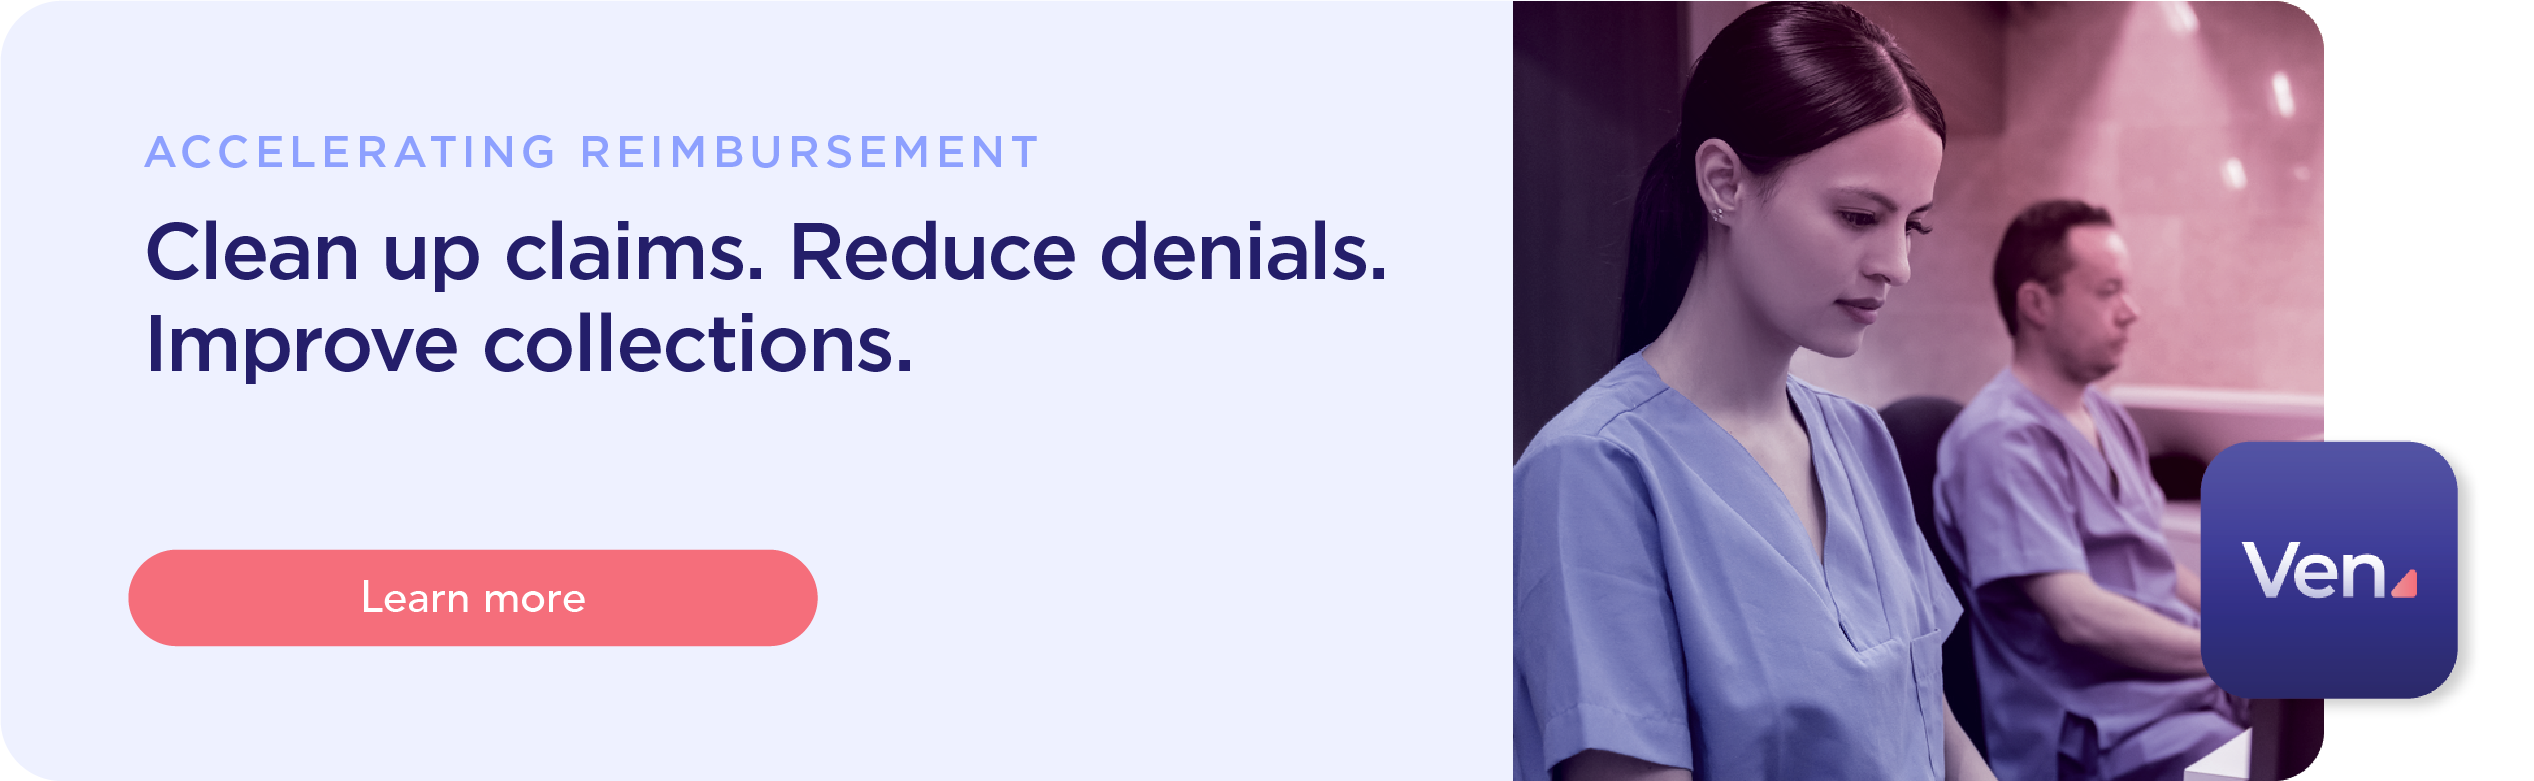 Clean up claims. Reduce denials. Improve collections. Learn more at our accelerating your reimbursements landing page.